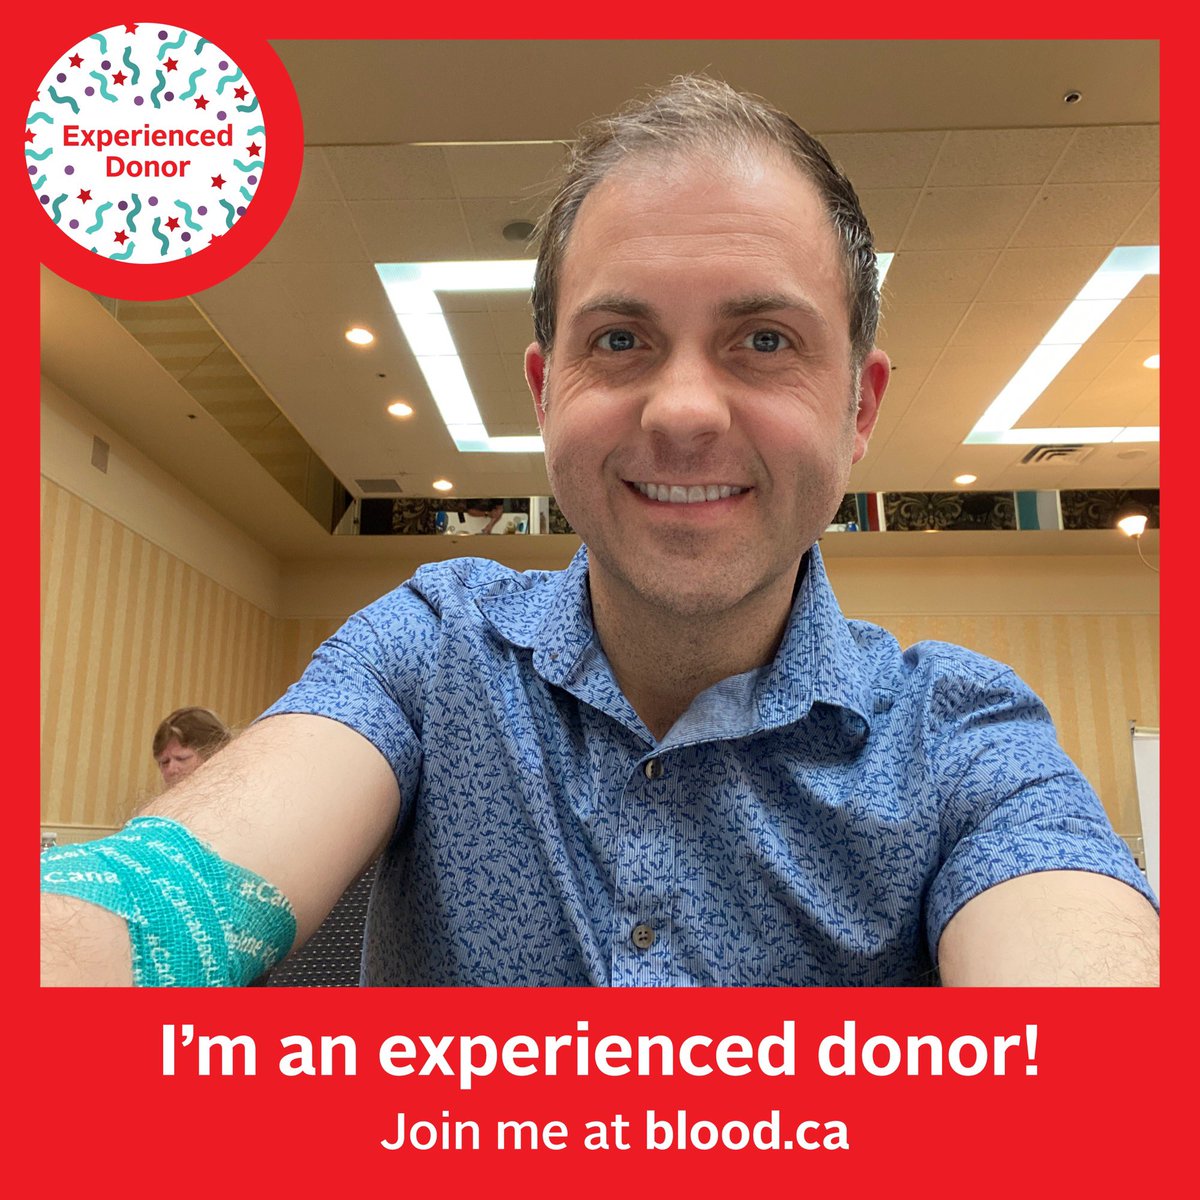 🩸 Today I celebrated my 85th blood donation.

1 in 2 people are eligible to donate blood and plasma, but only 1 in 81 does?

Schedule your blood donation today and be a hero for someone.

@CanadasLifeline

#NBDW #volunteer #ShineALight #GiveBlood #DonateBlood #ItsInYouToGive